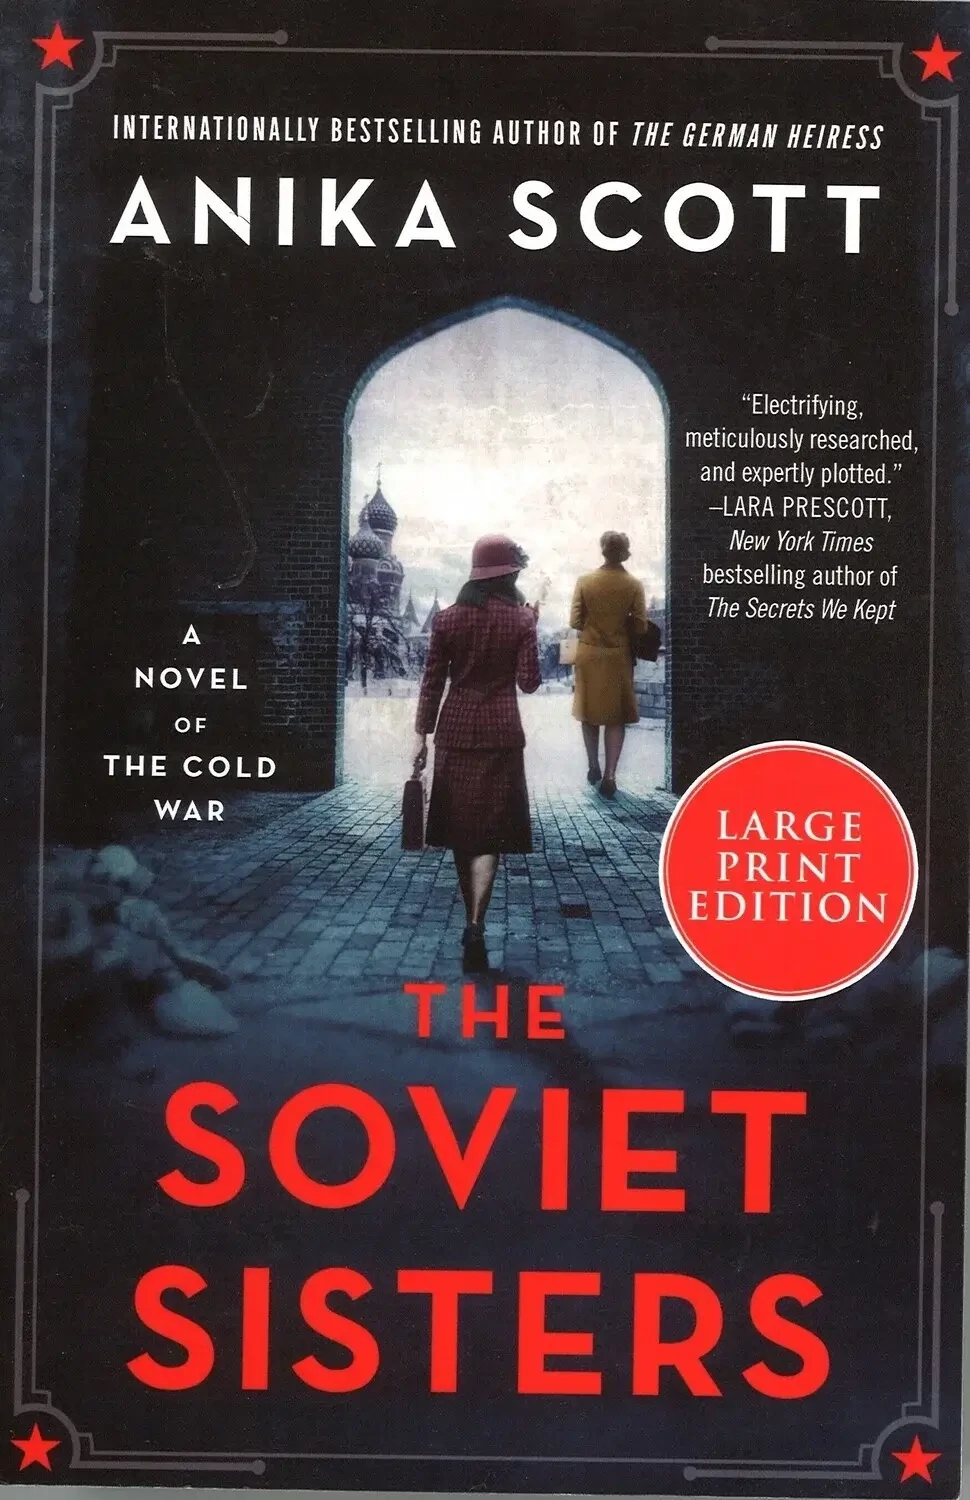 The Soviet Sisters (Large Print) by Anika Scott